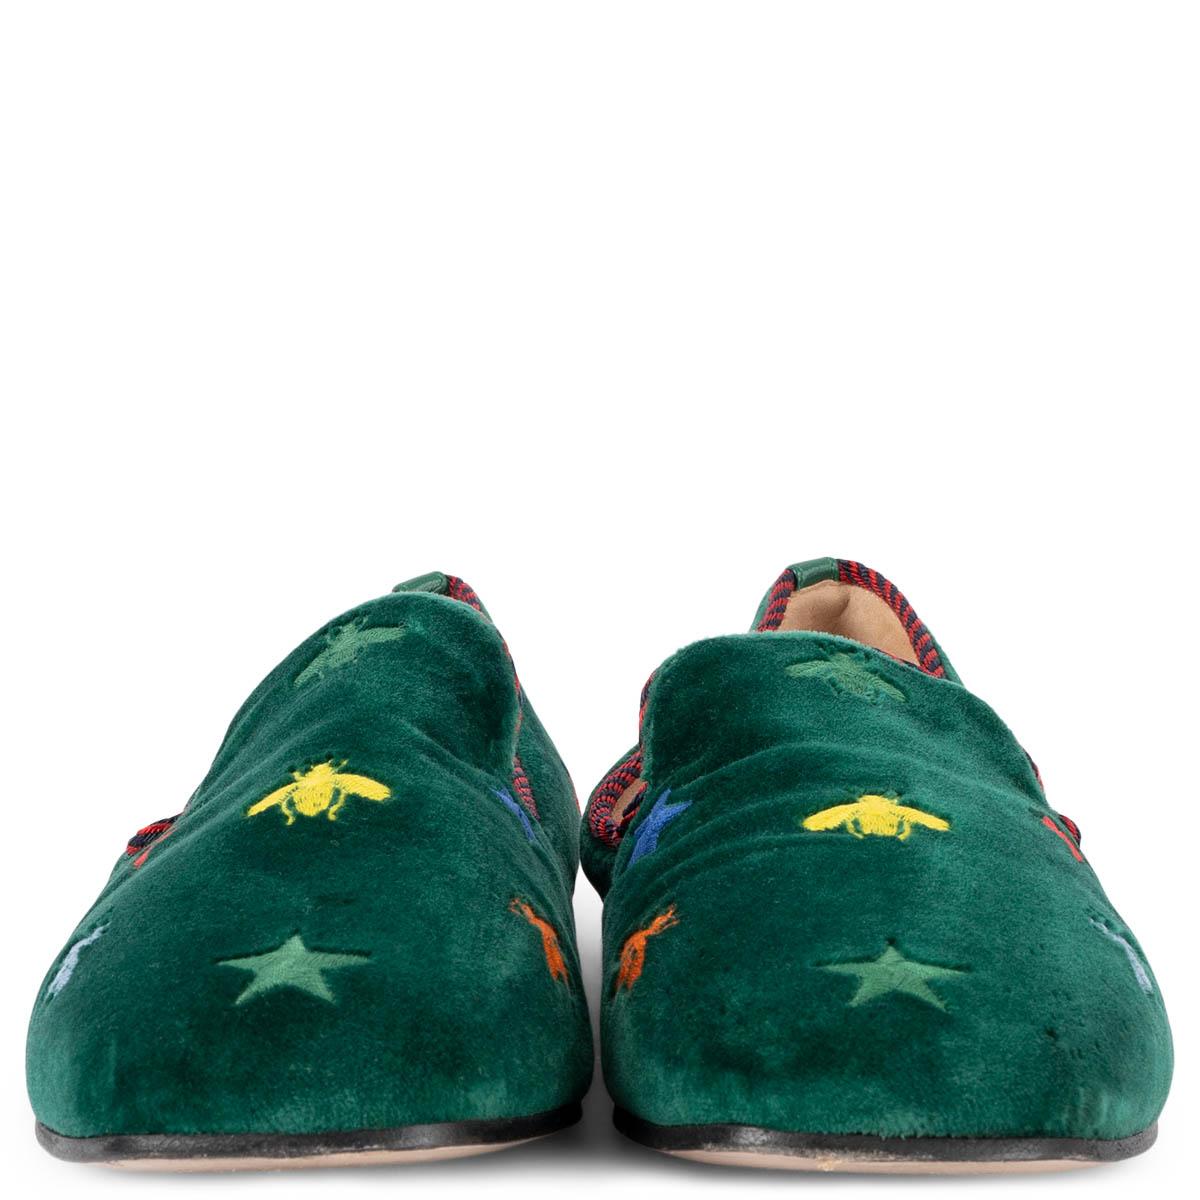 100% authentic Gucci Kibi loafers in green velvet. The design features green, yellow, red, and blue embroidered bees and stars and are trimmed with rd and black striped grosgrain piped edges. Have been worn and are in excellent condition. Comes with